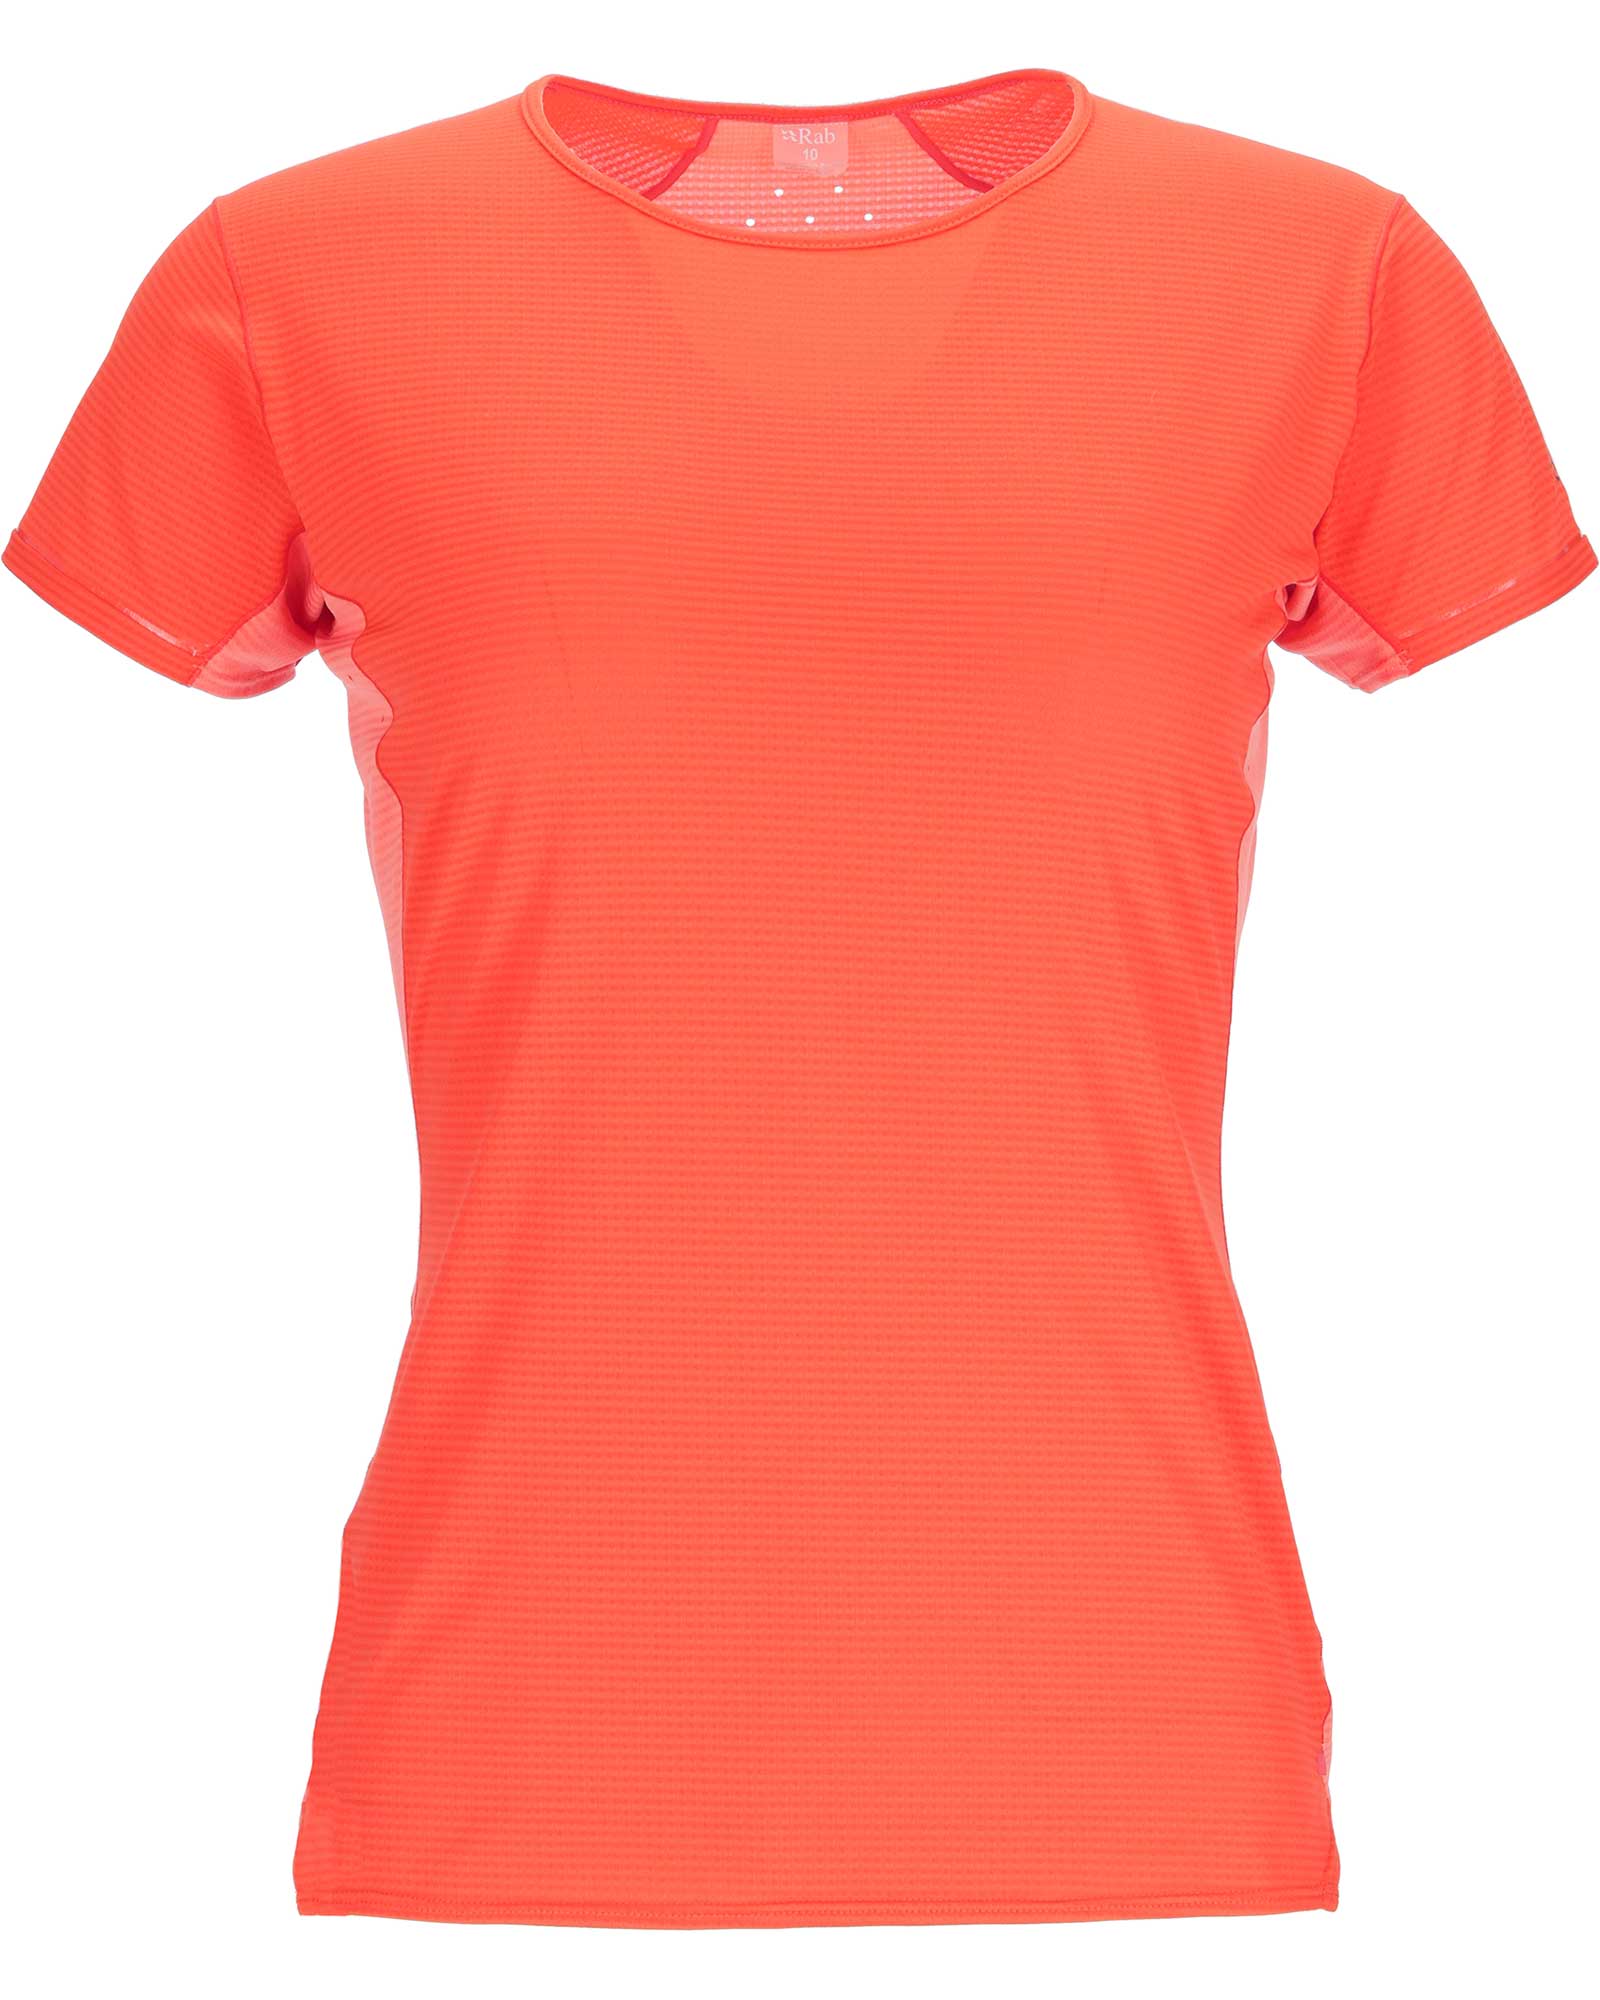 Product image of Rab Sonic Ultra Women's T-Shirt